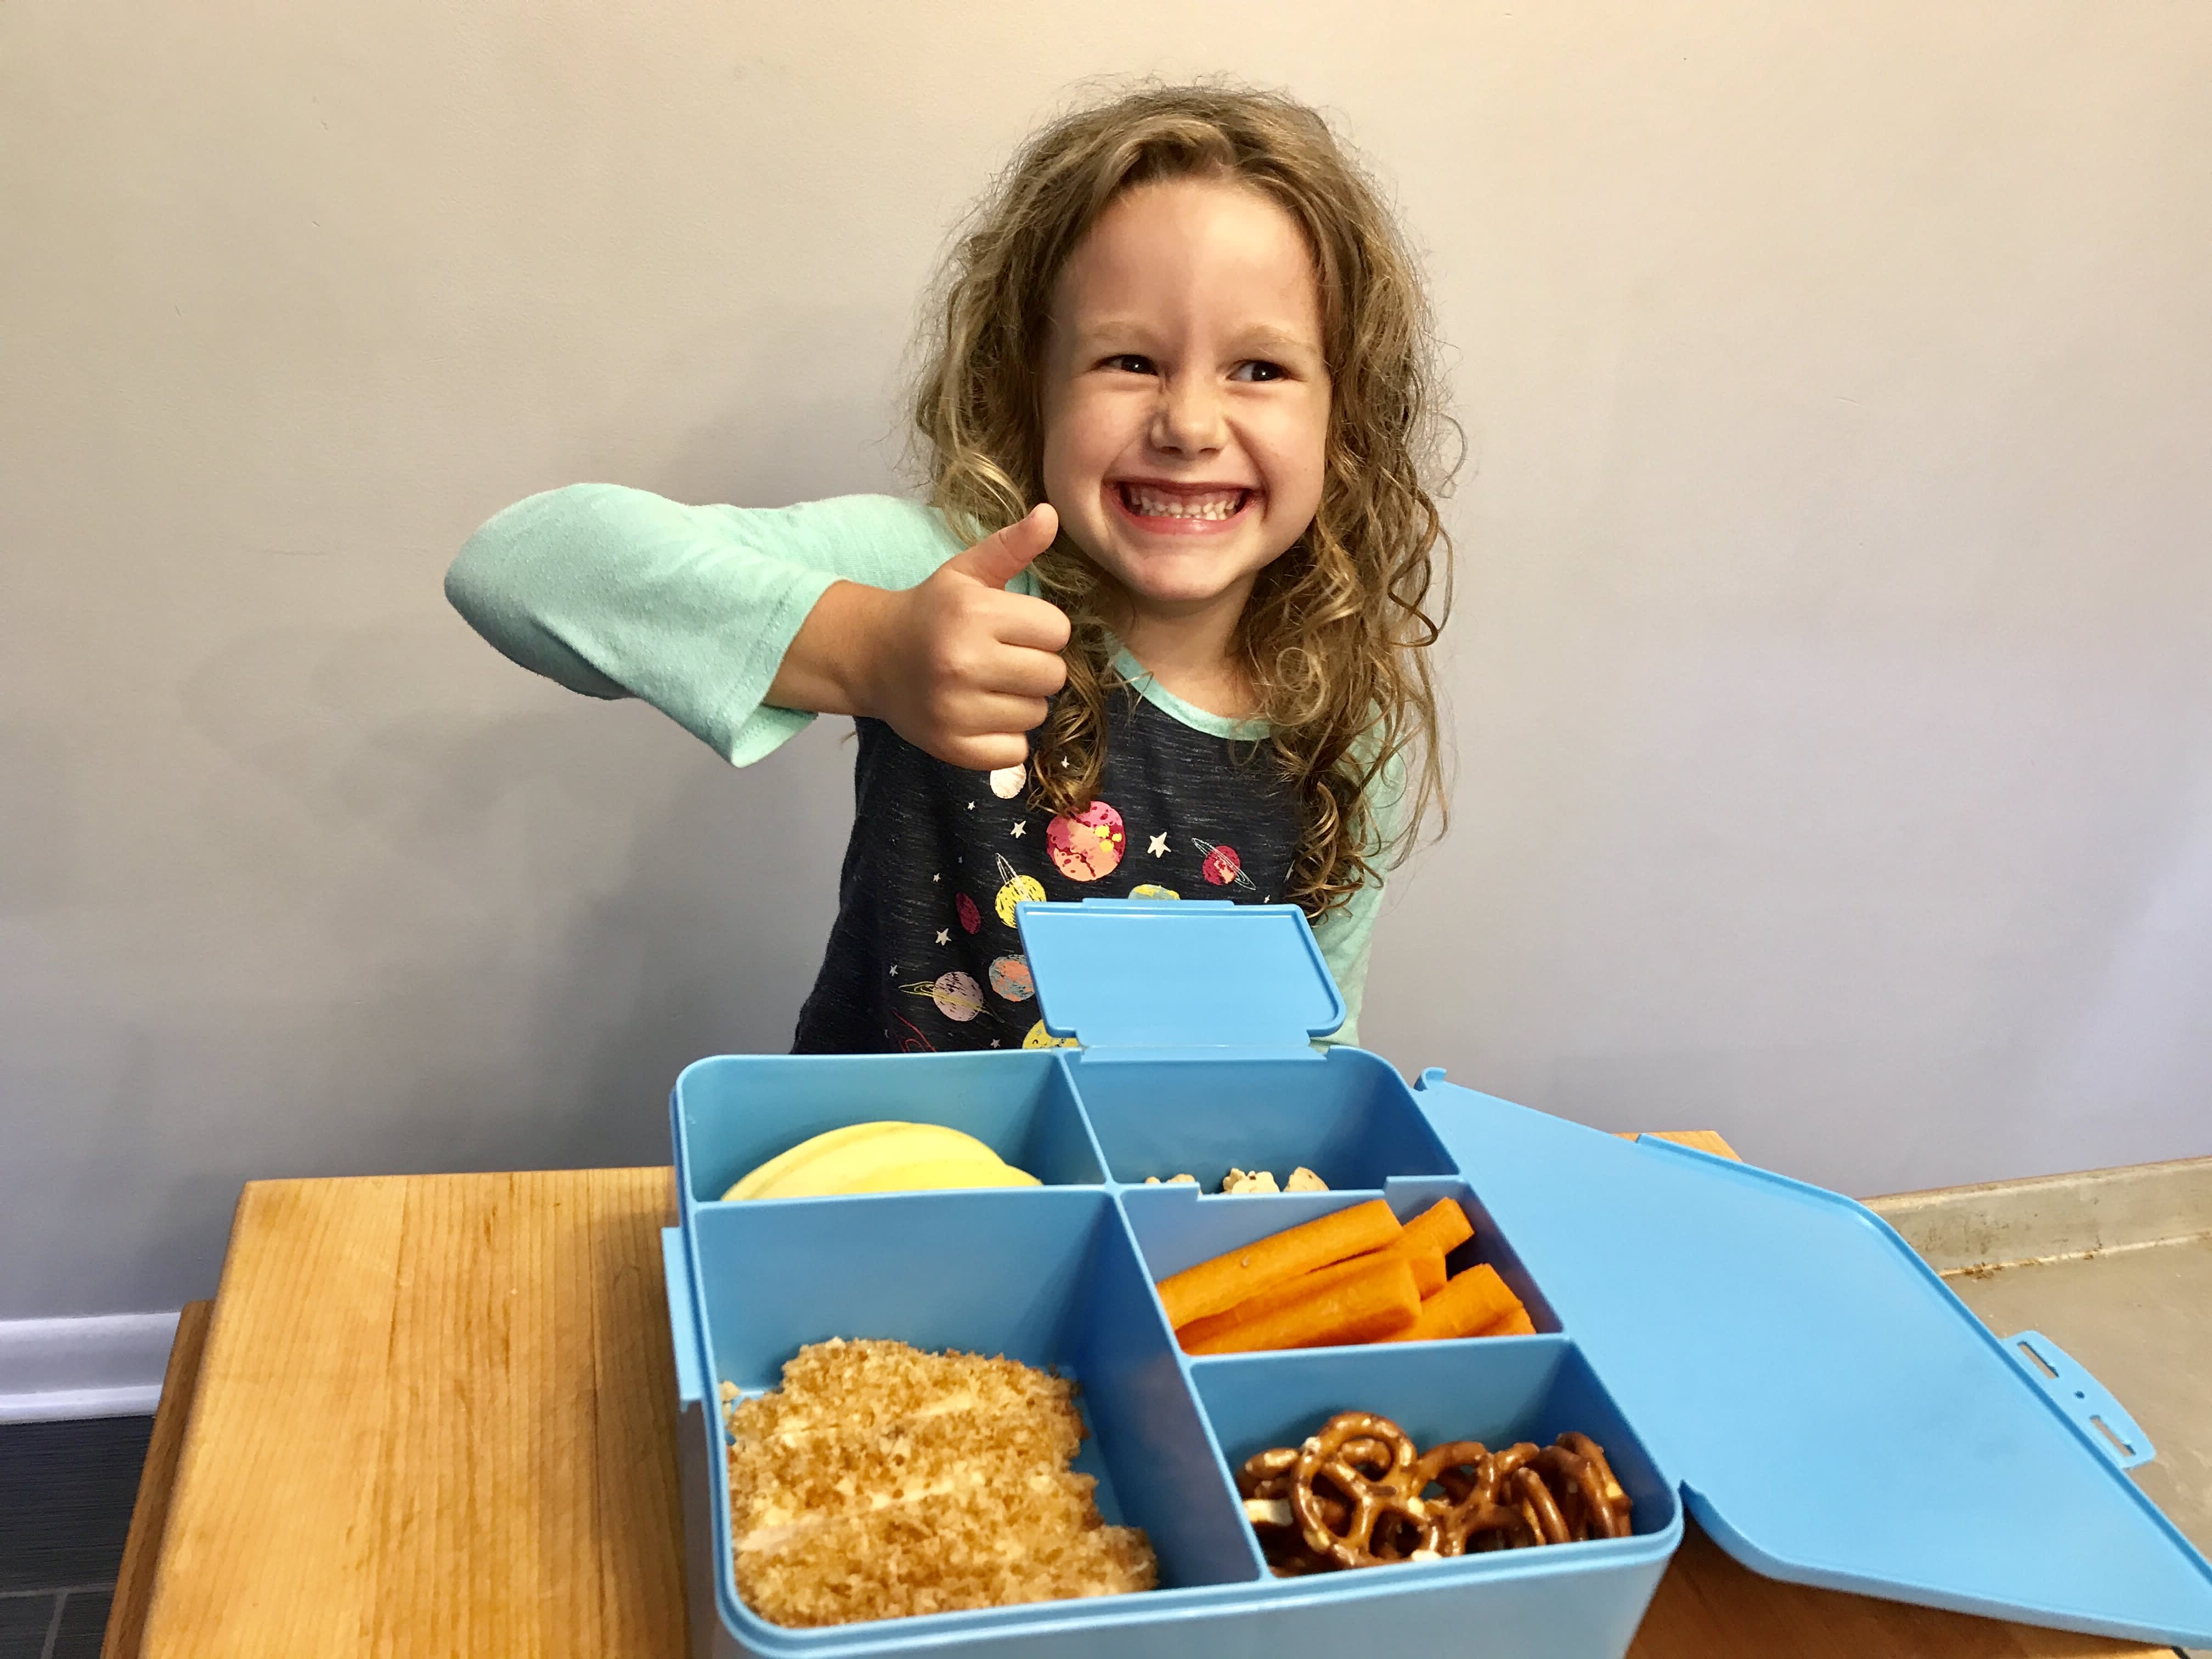 An Honest Review of 5 of the Most Popular Lunch Boxes from a Mom